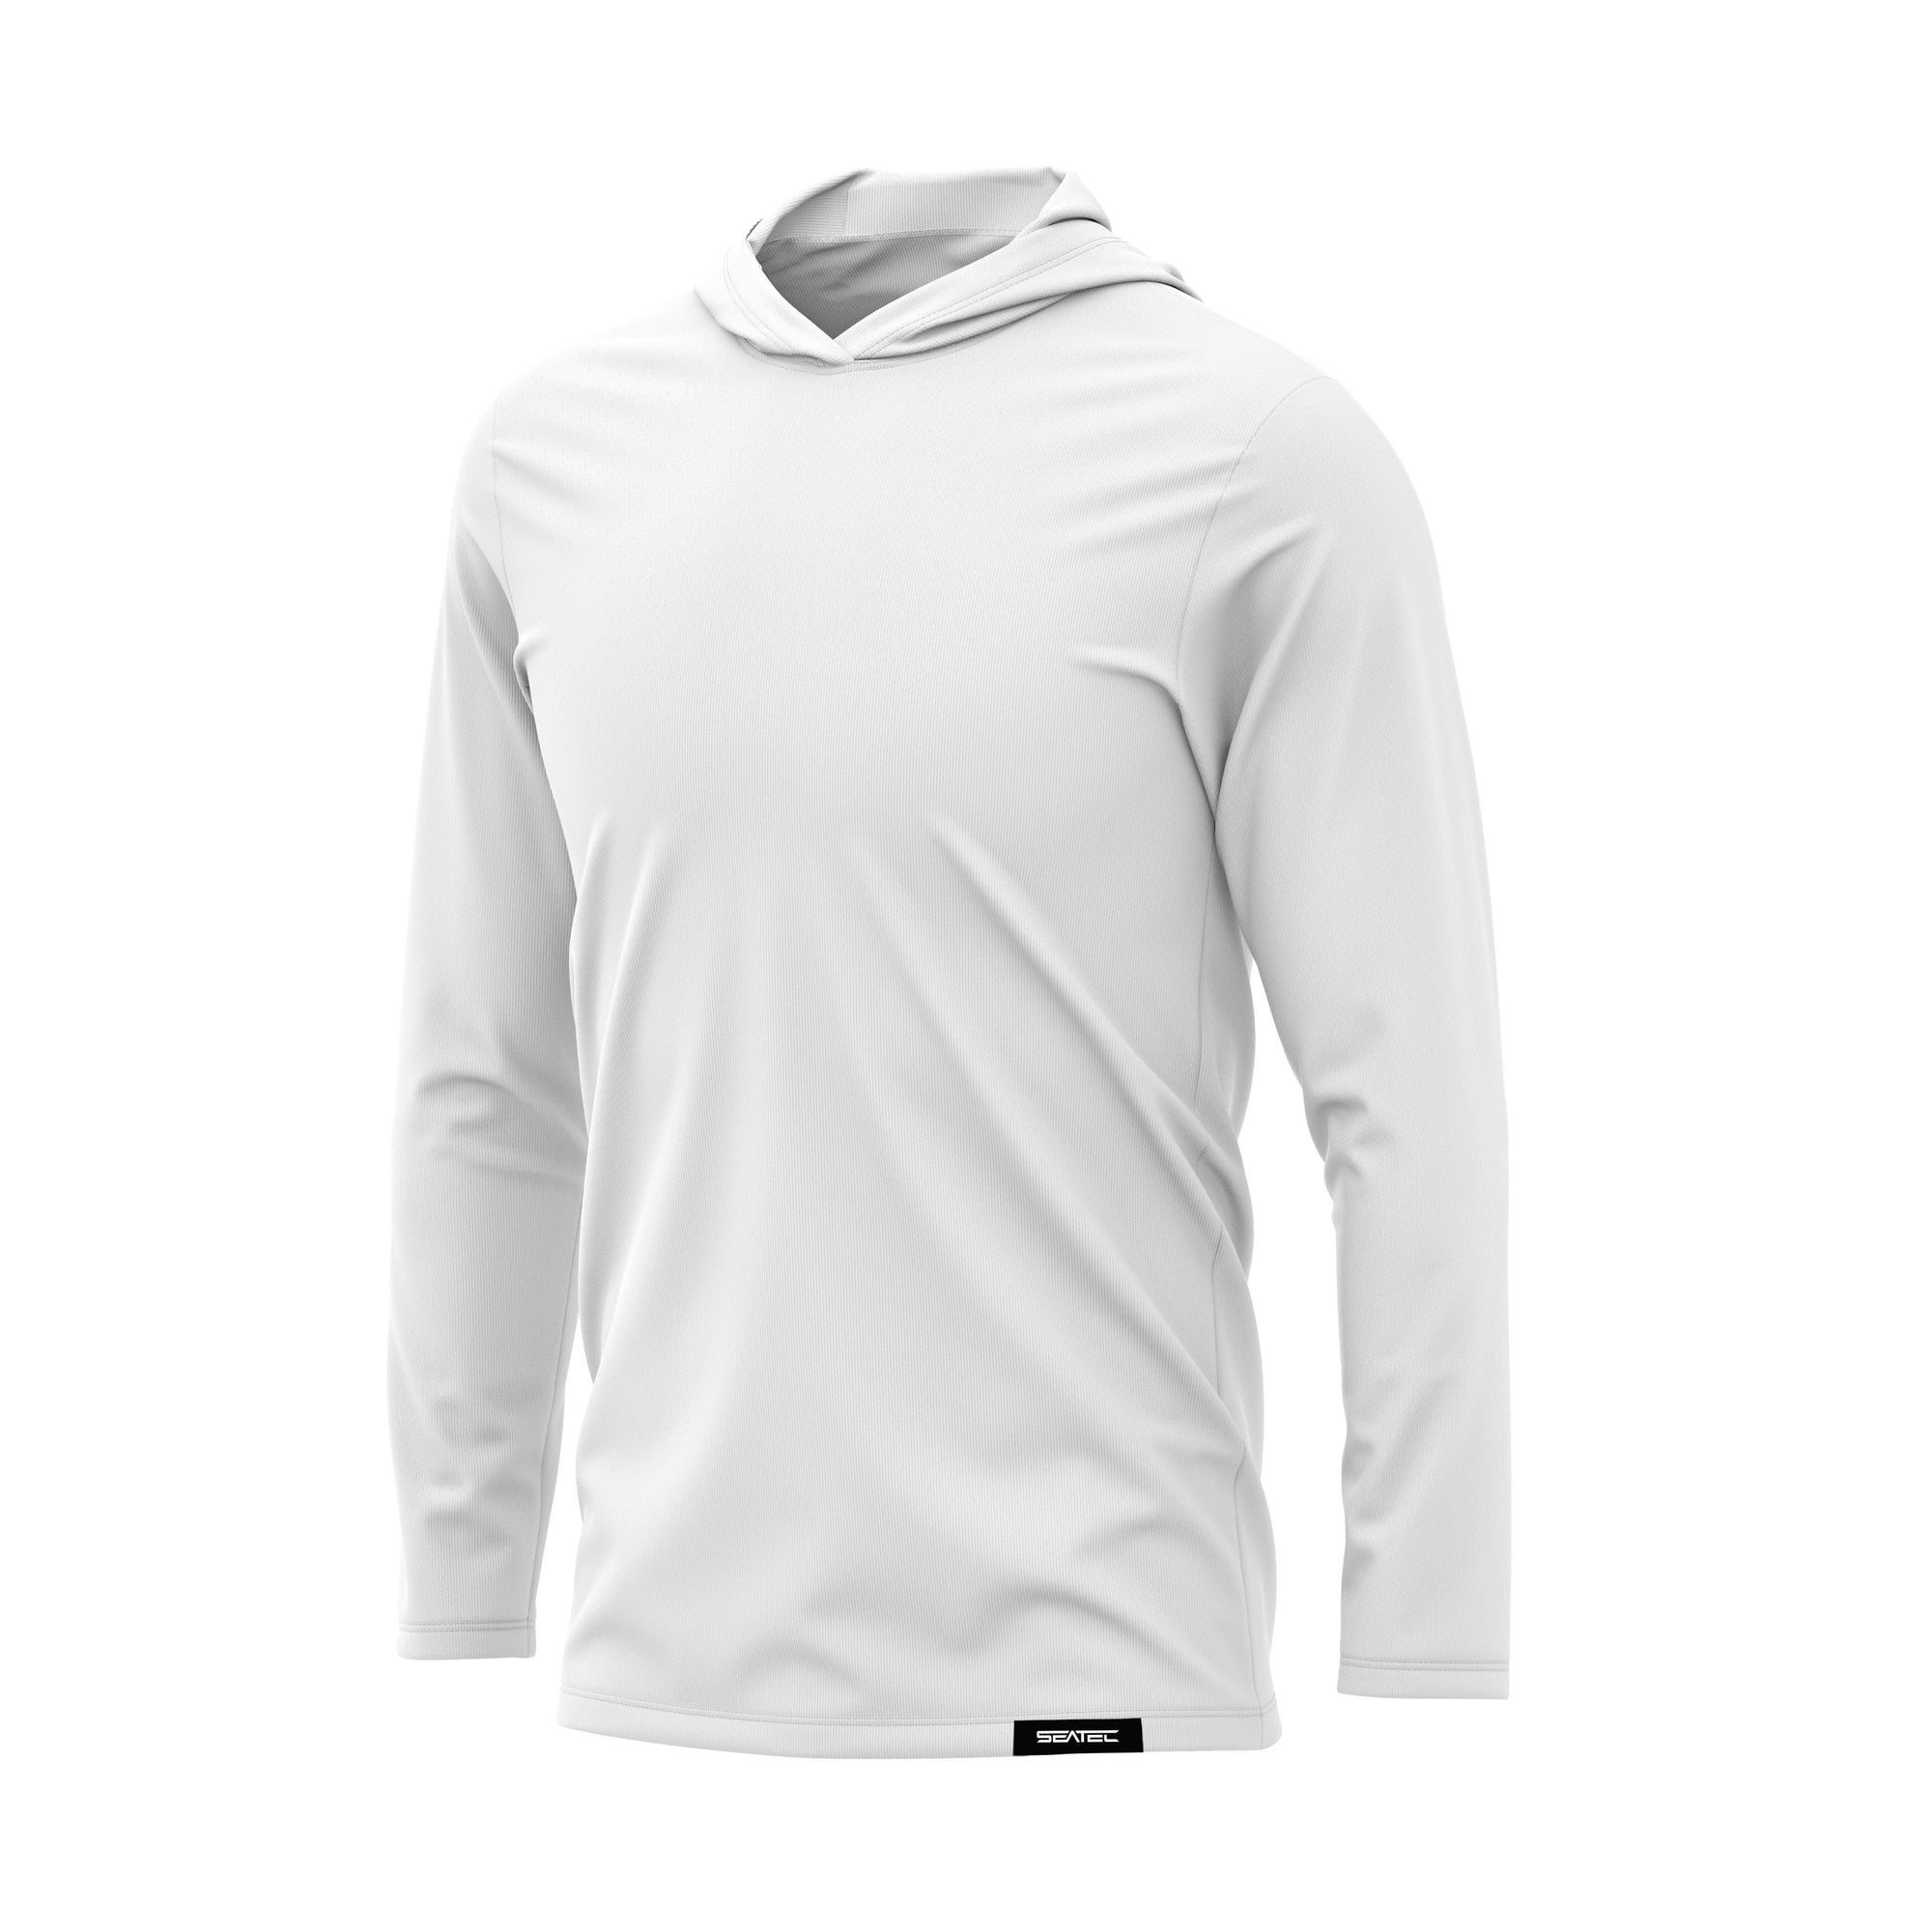 Seatec Outfitters Performance Shirts MEN'S ACTIVE | TITANIUM WHITE | LS HOODED